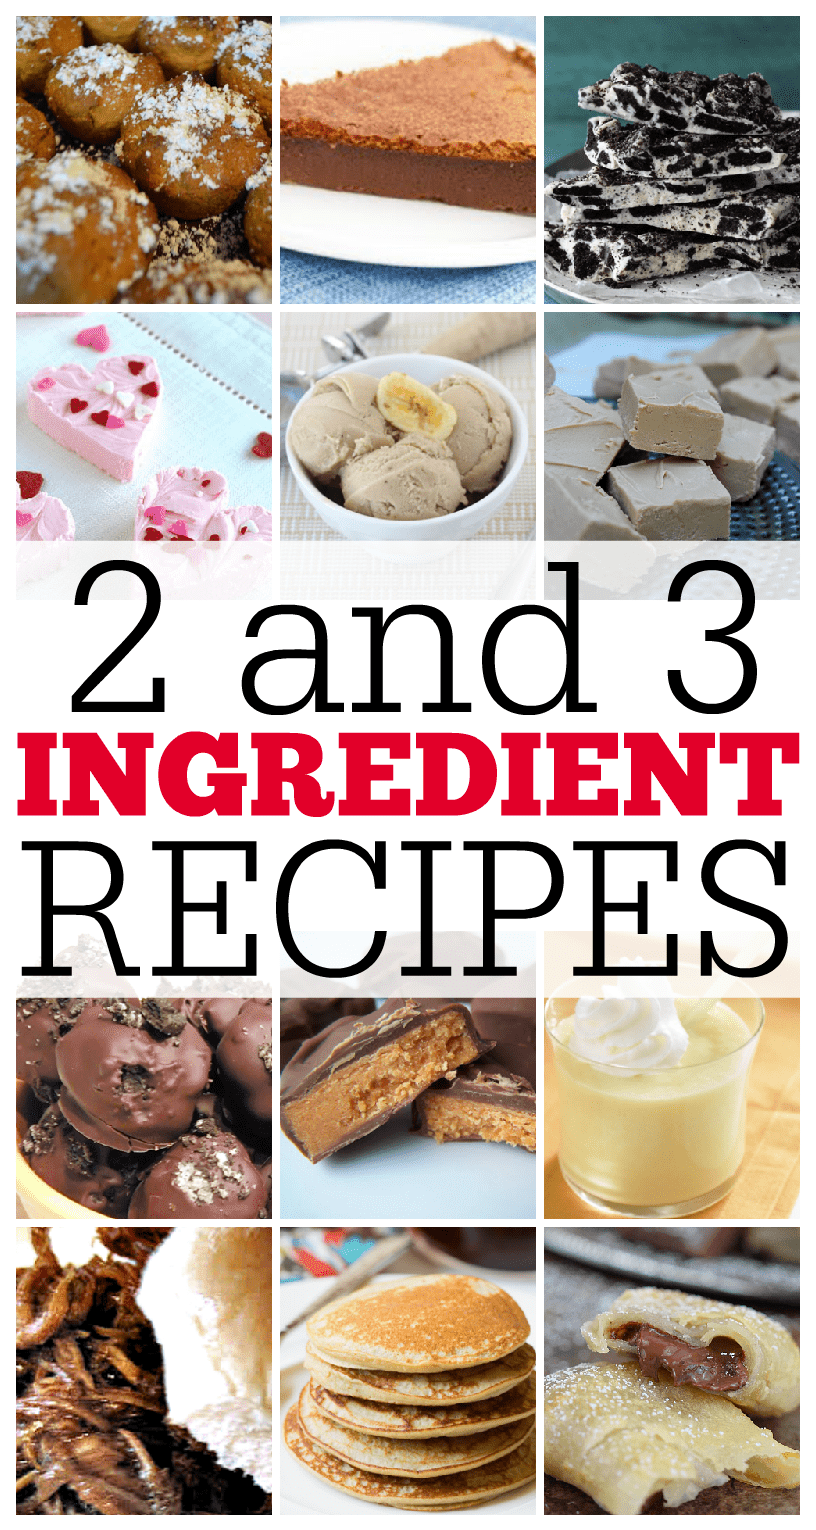 12 quick, easy and delicious 2 and 3 ingredient recipes. These all consist of mainly desserts but hey dessert is the best part of any meal.